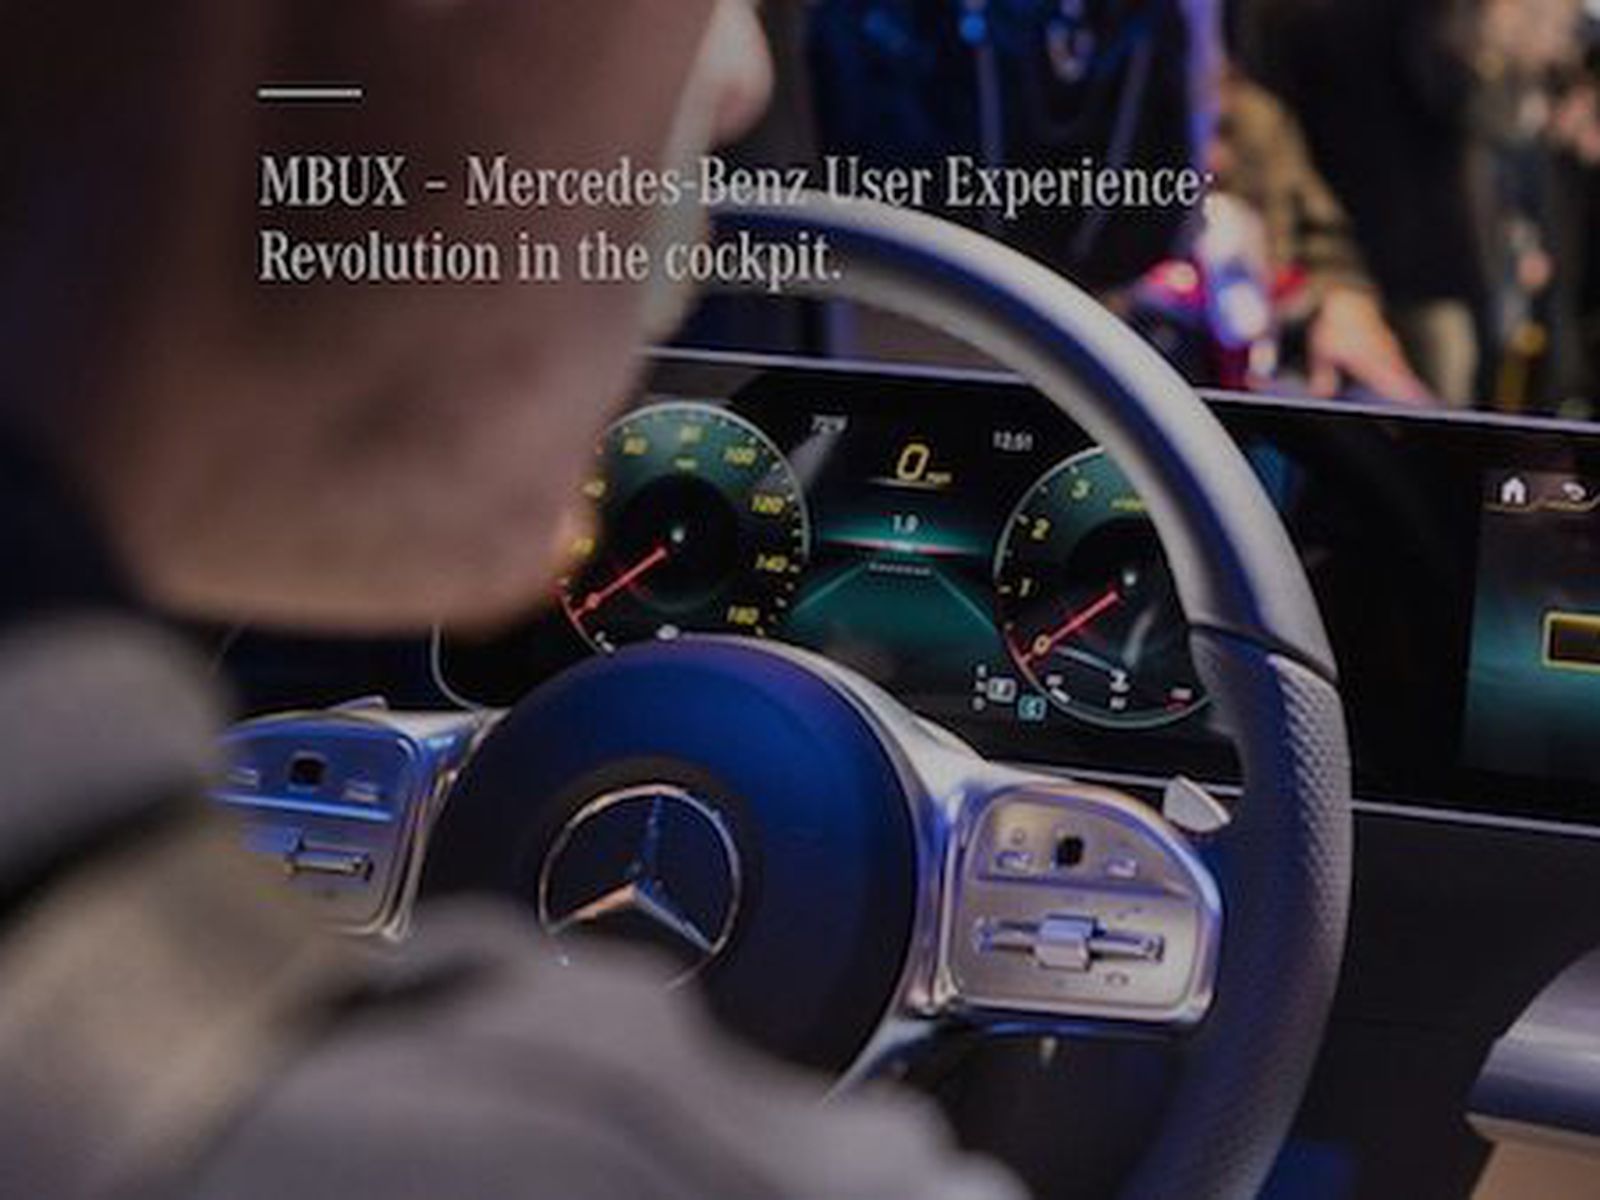 Mercedes-Benz's New MBUX System Will Feature Wireless CarPlay